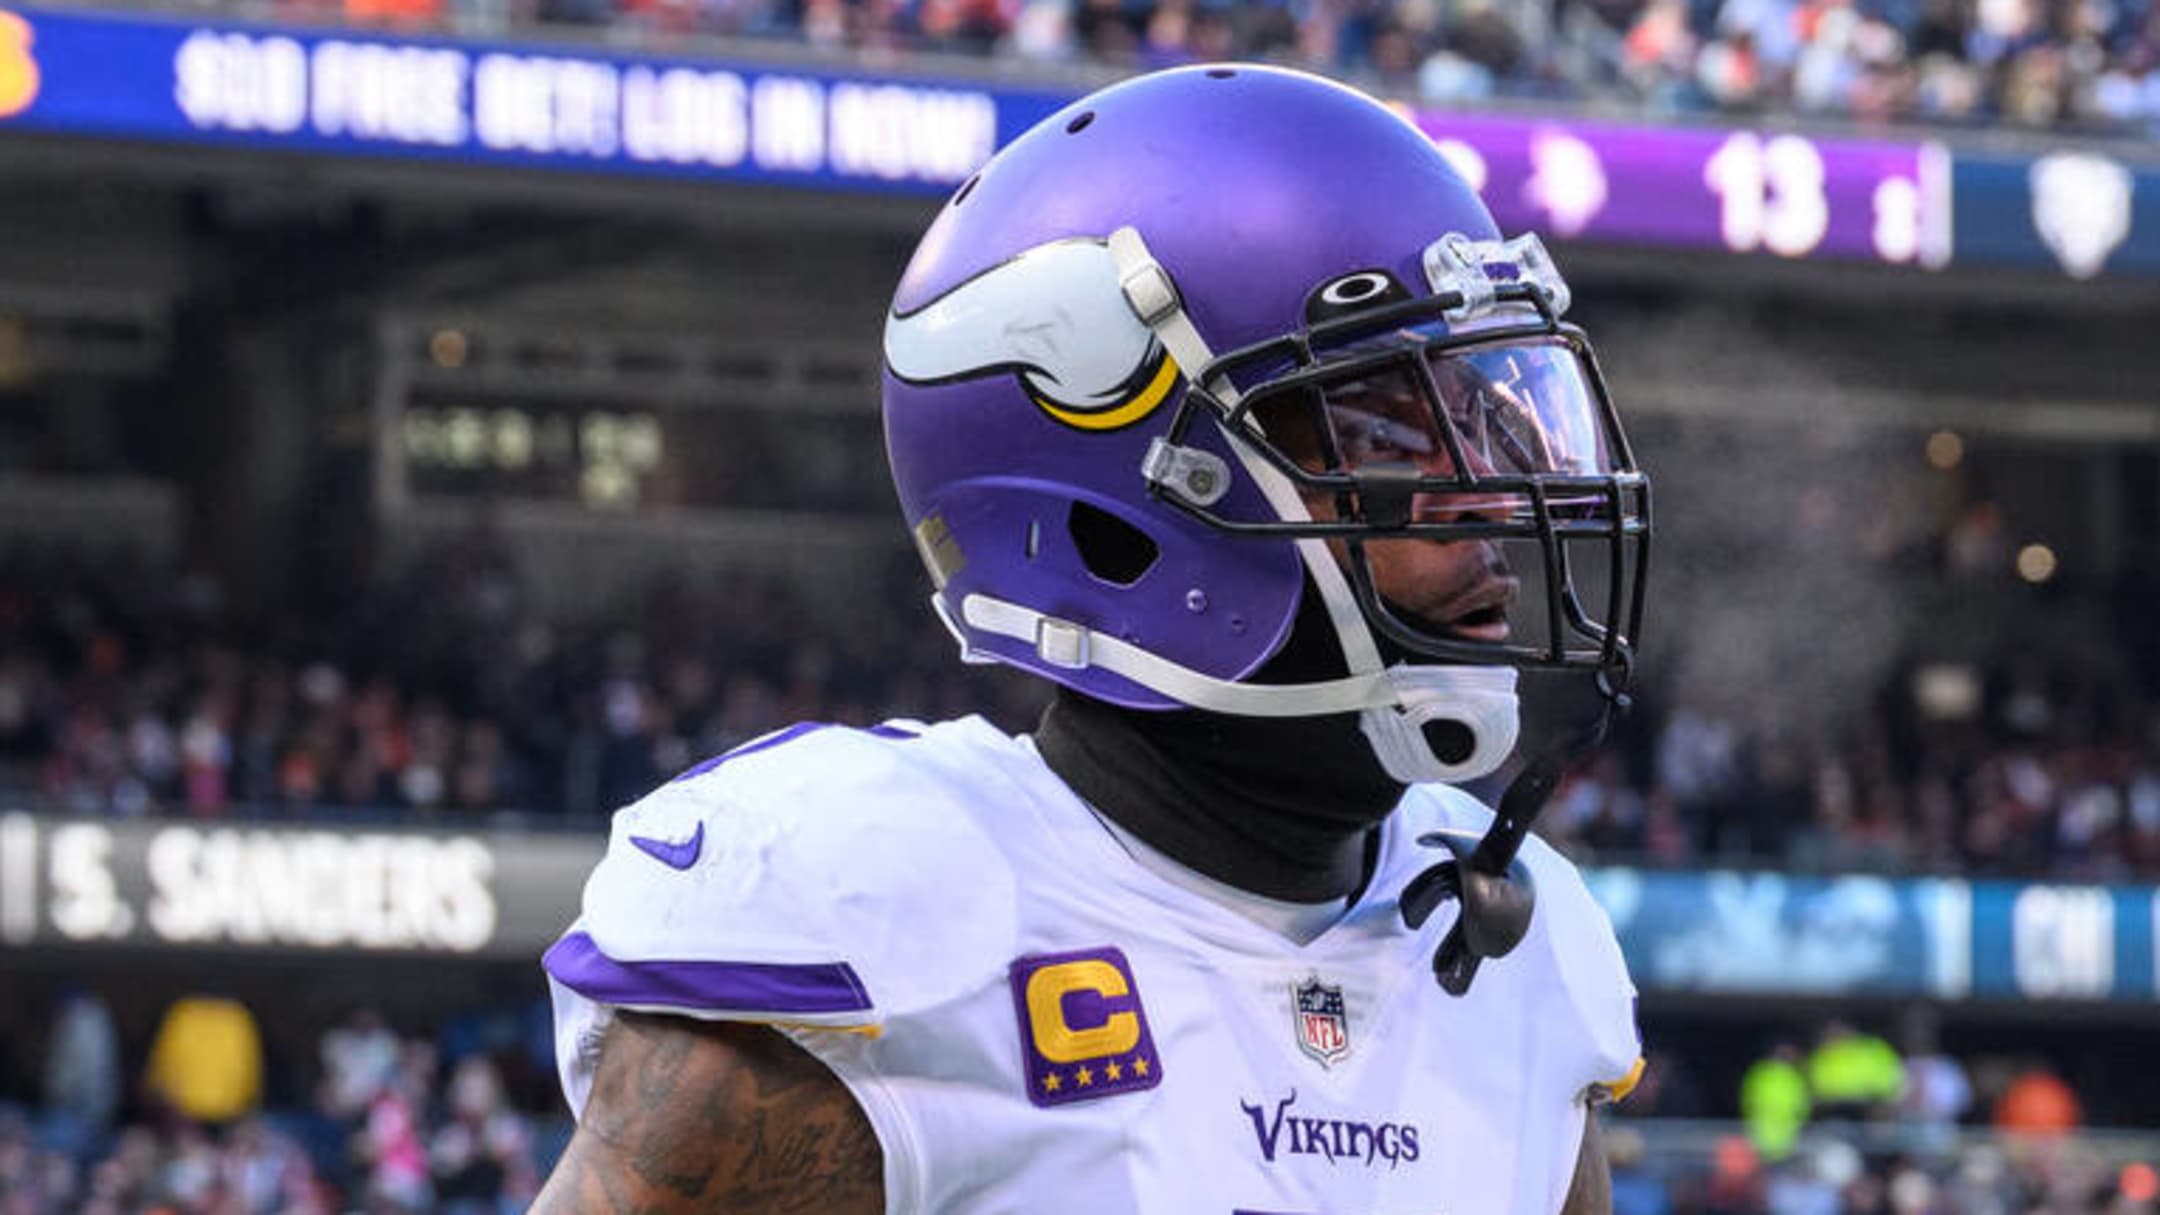 CB Patrick Peterson says he's re-signing with Minnesota Vikings - ESPN